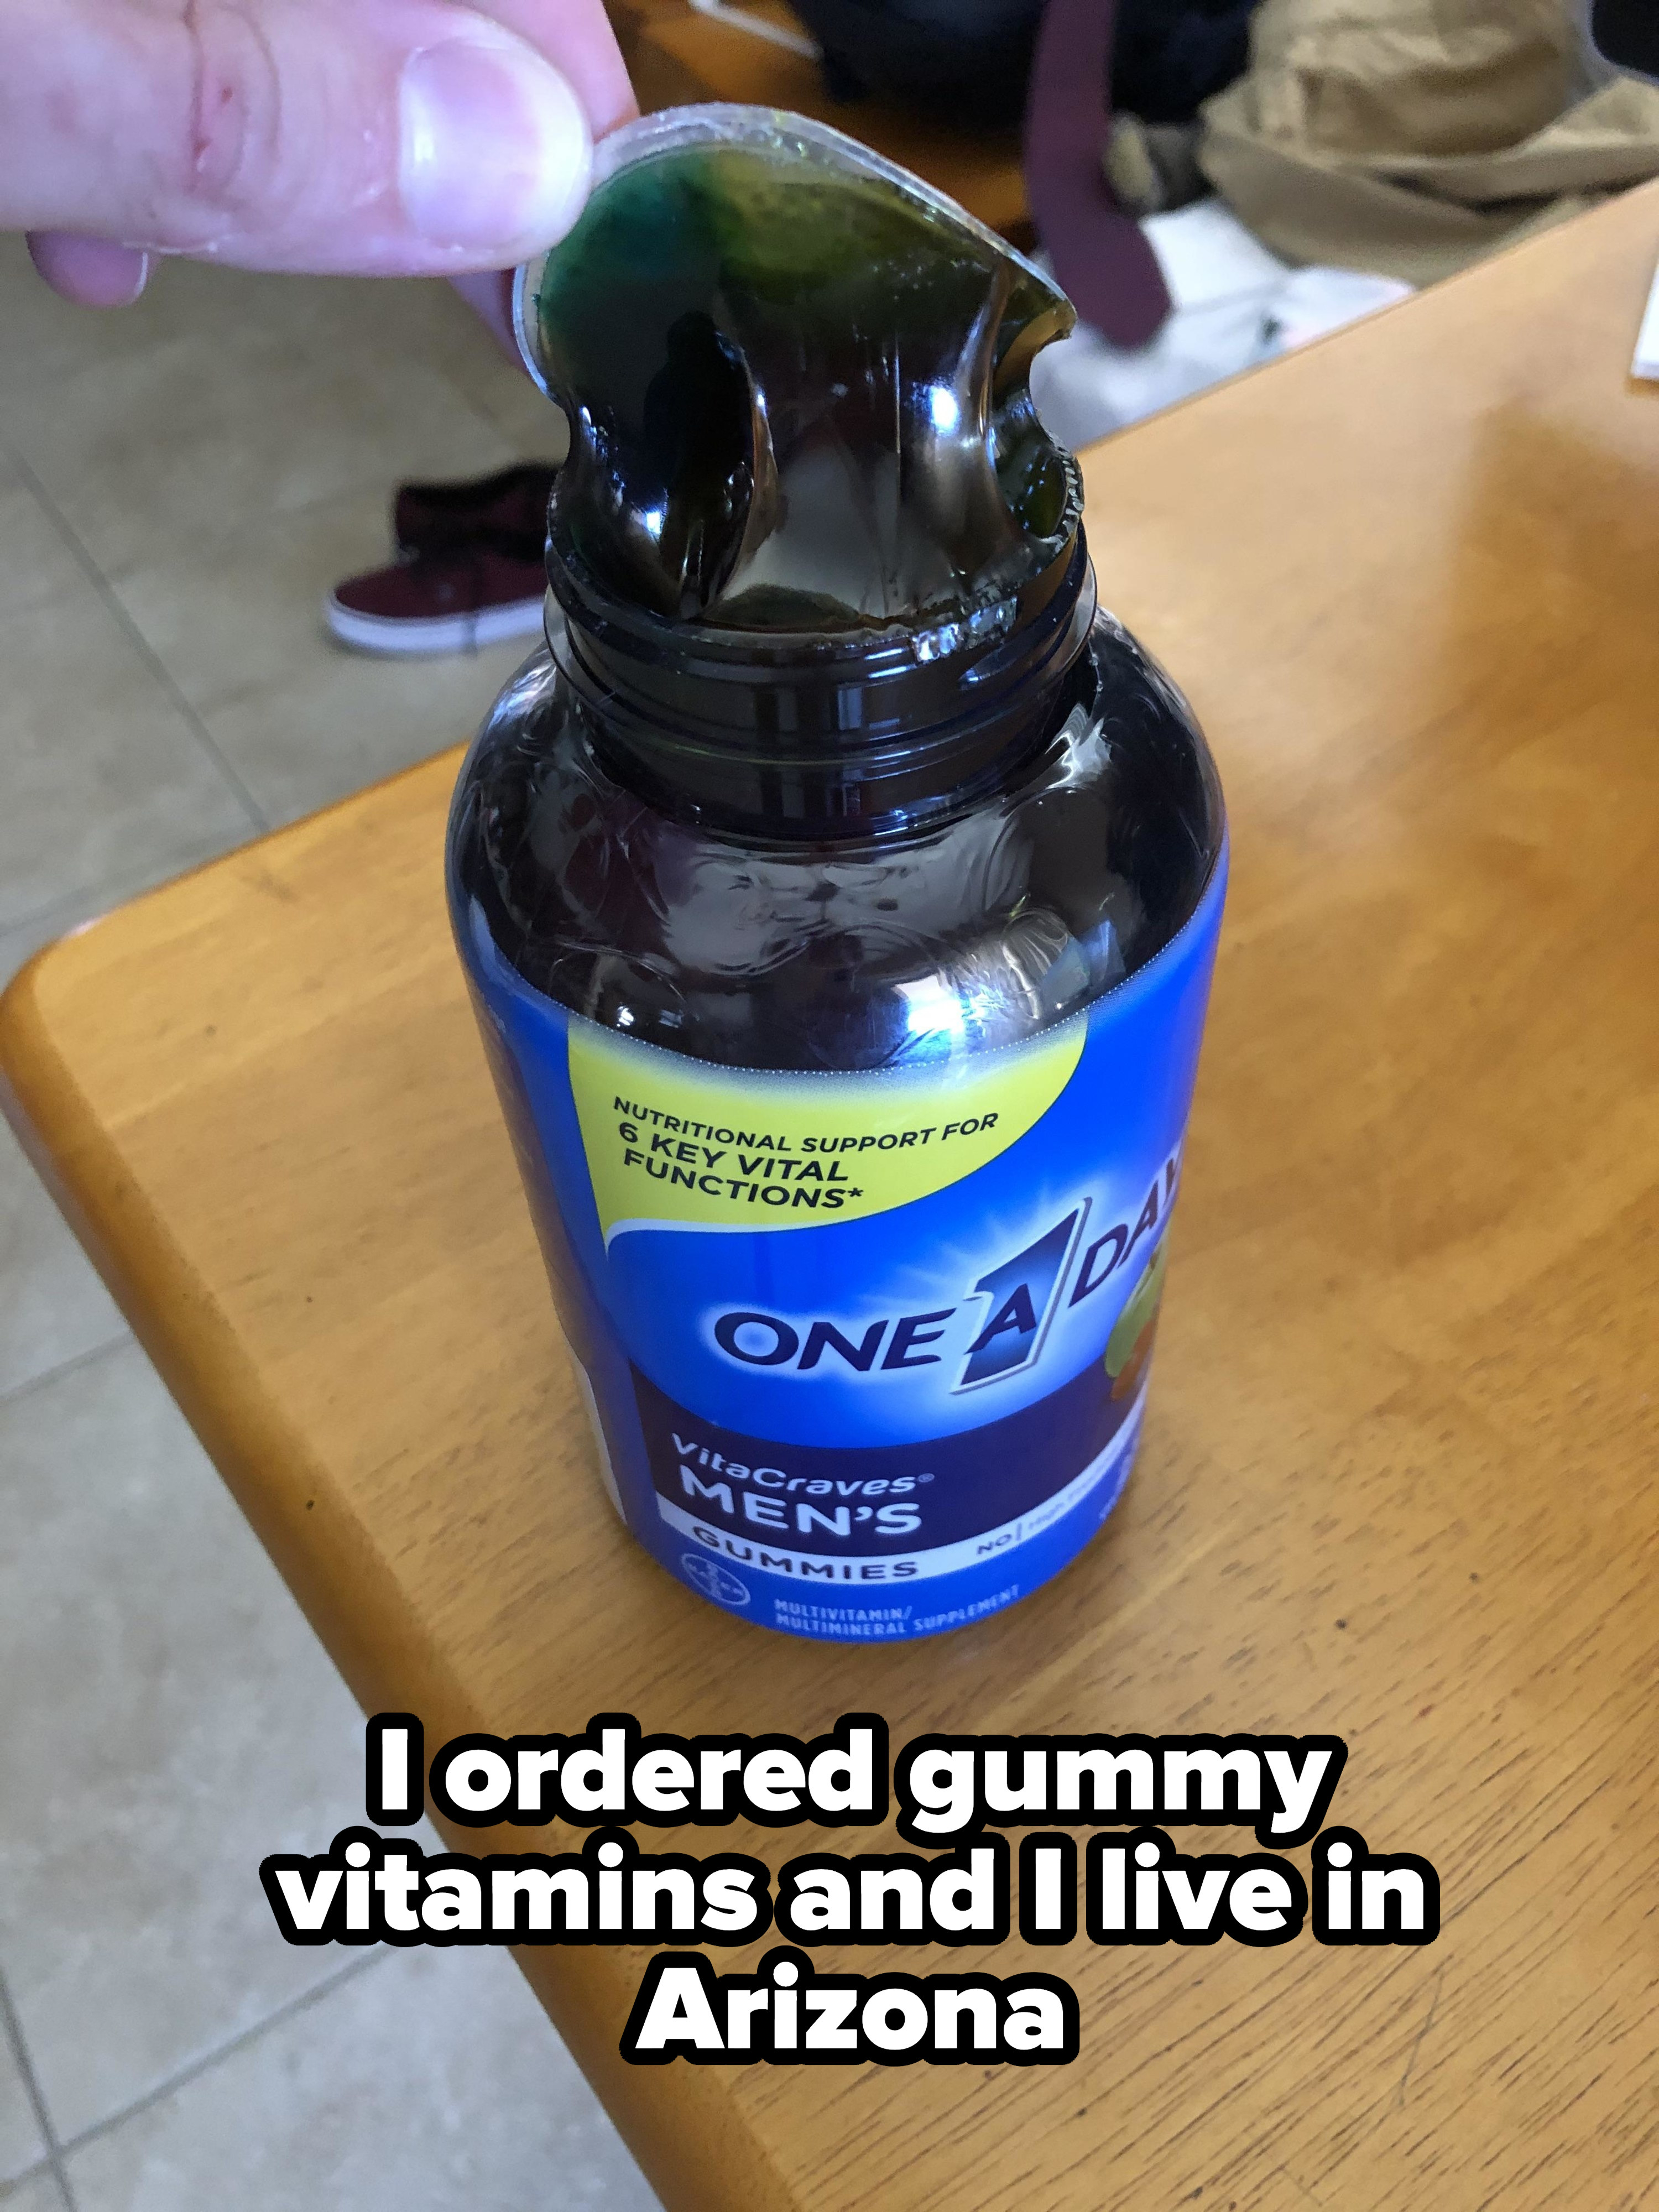 &quot;I ordered gummy vitamins and I live in Arizona&quot;